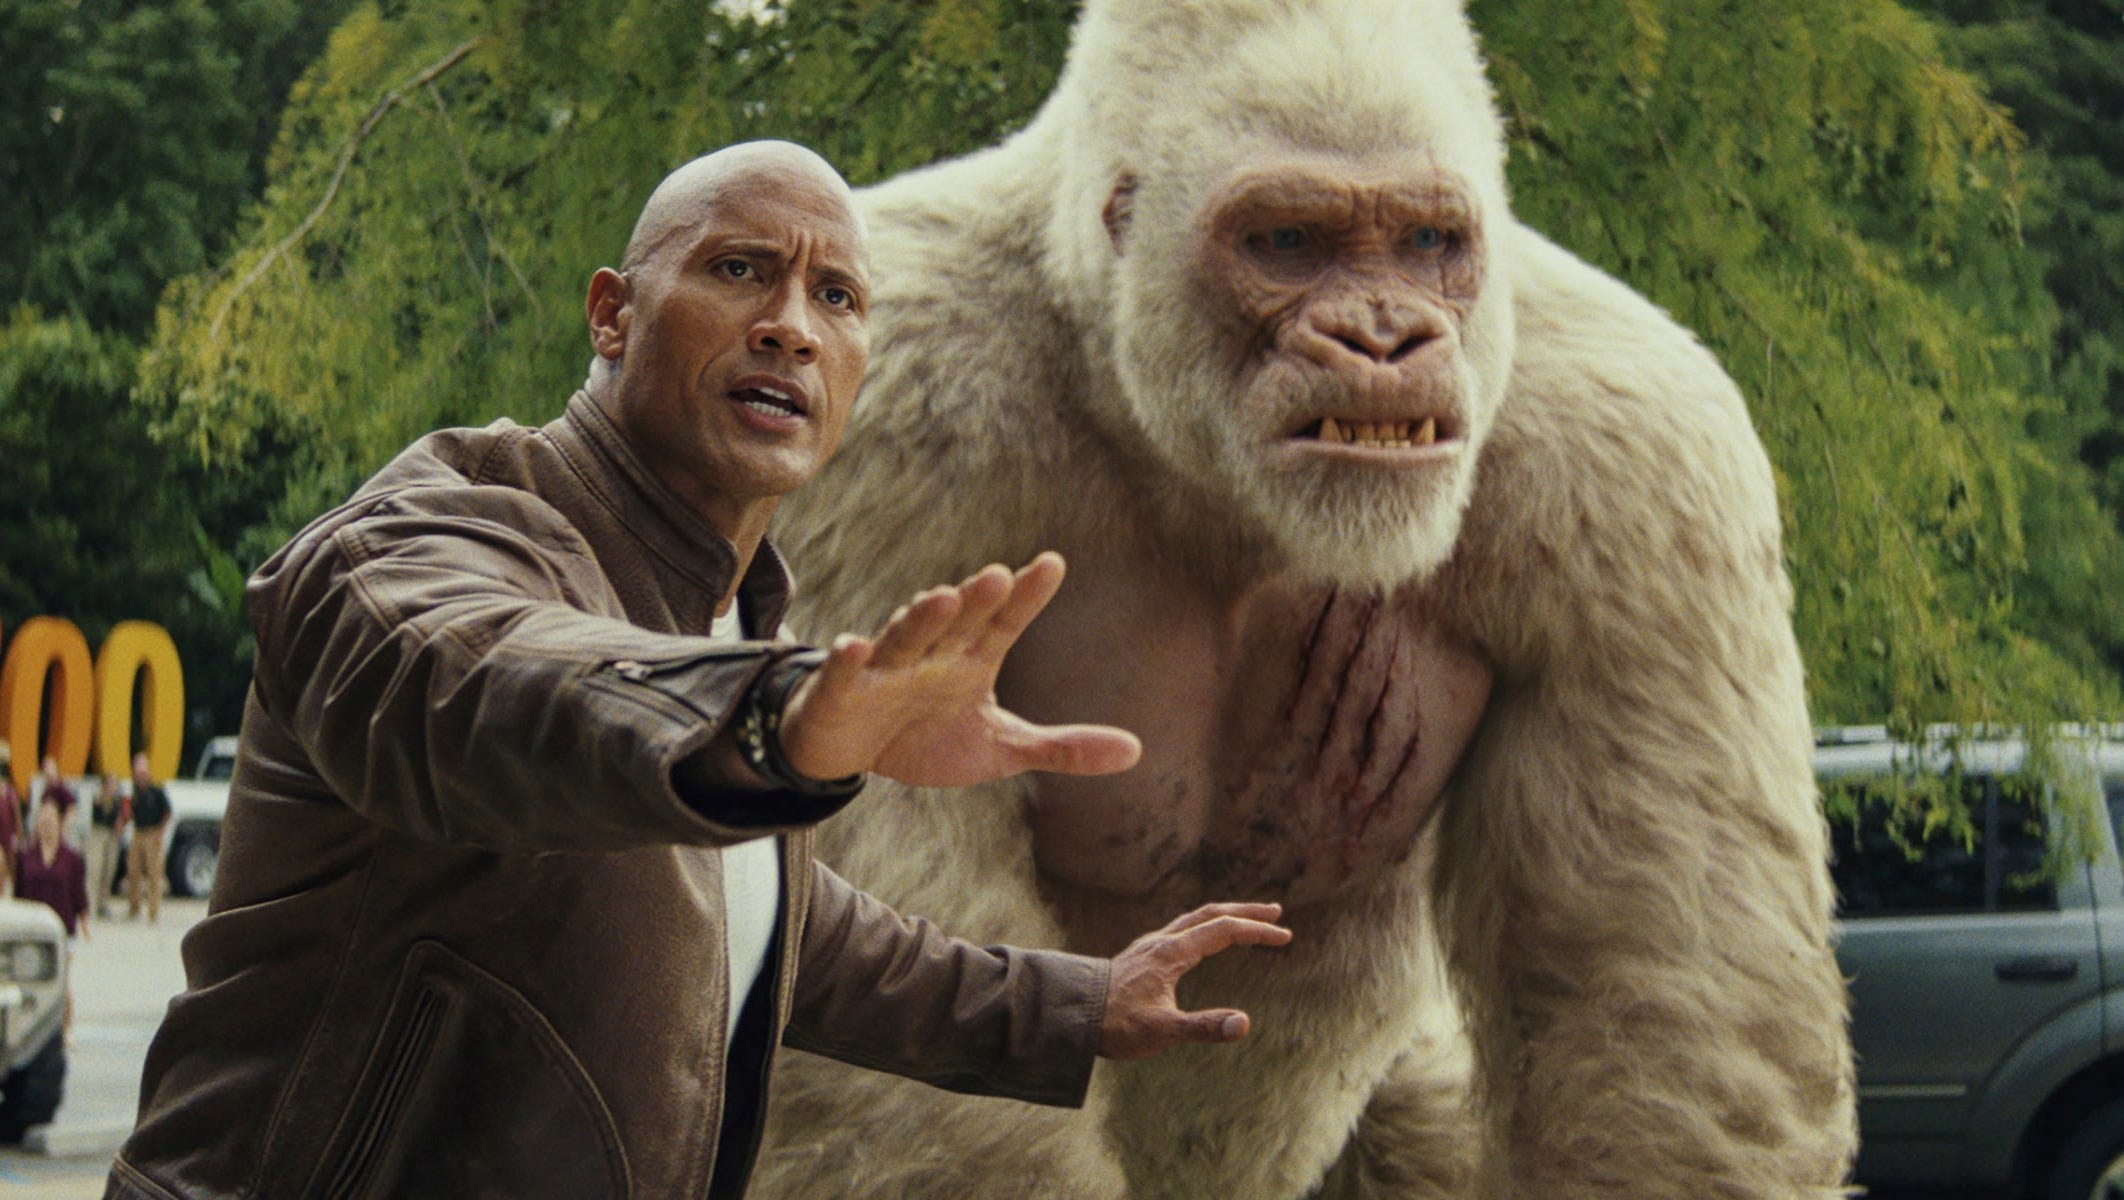 dwayne johnson tries to protect george the giant ape with his giant hand